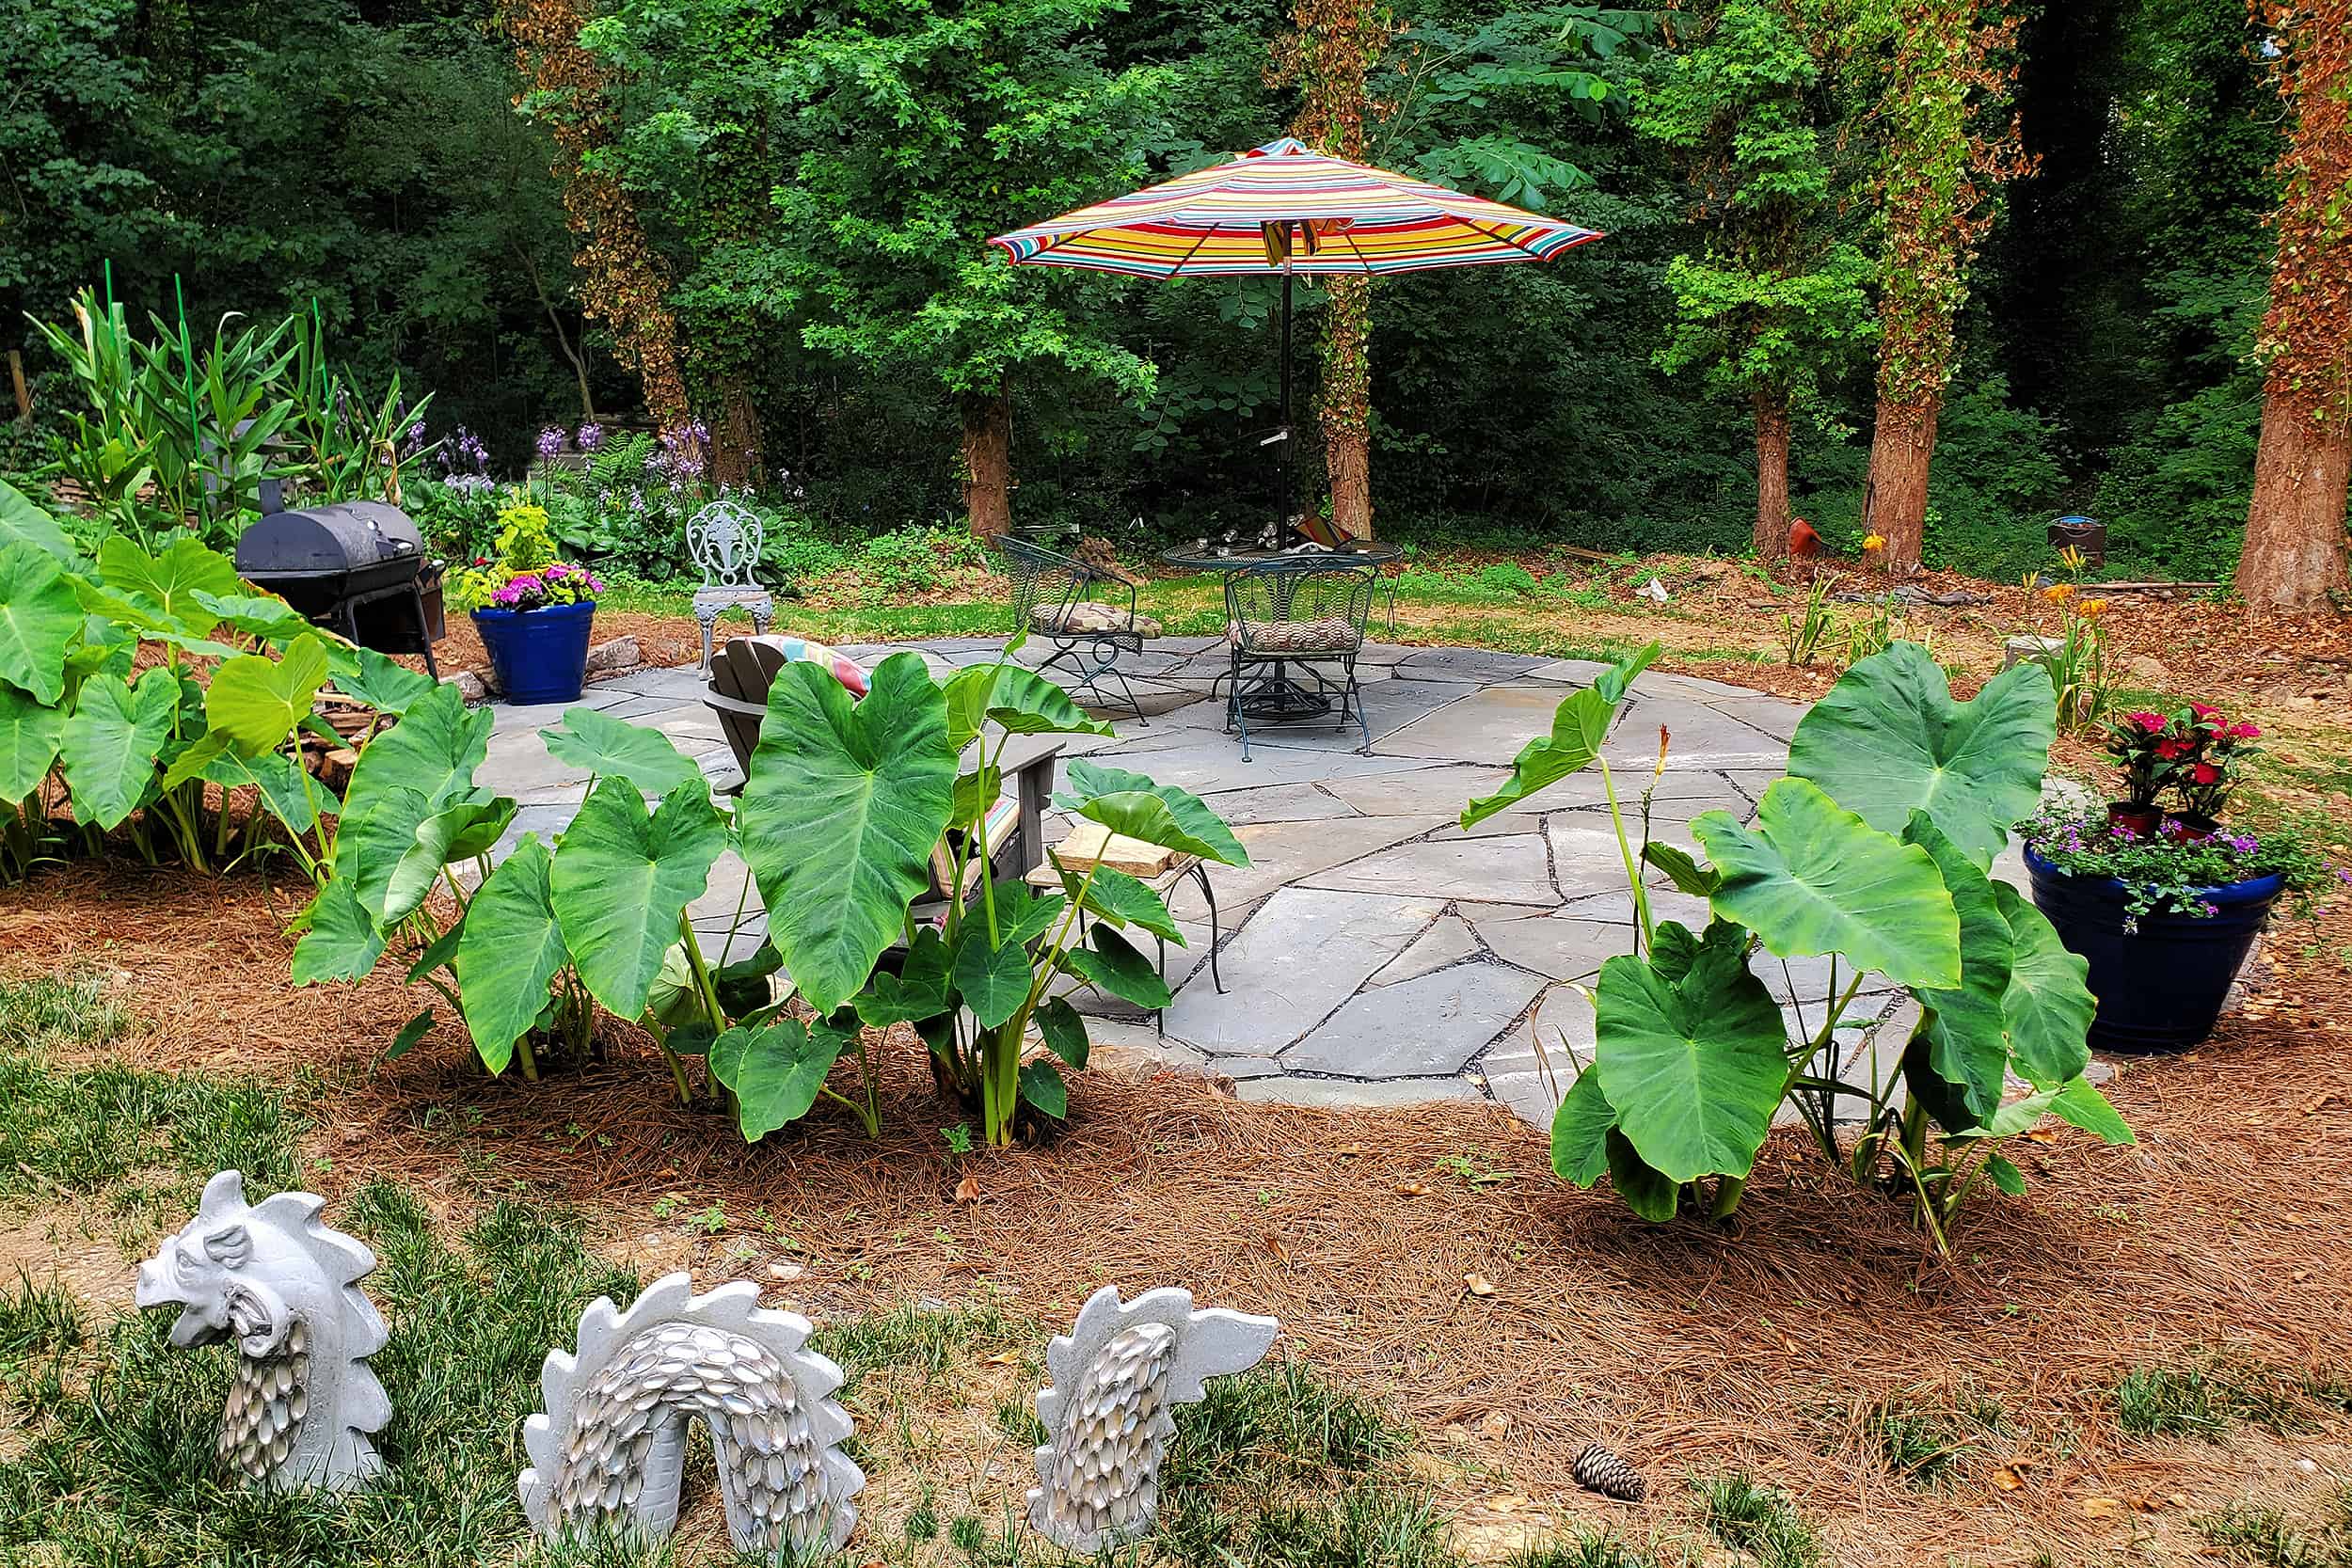 Lawrenceville landscaping with flagstone patio with whimsical garden art